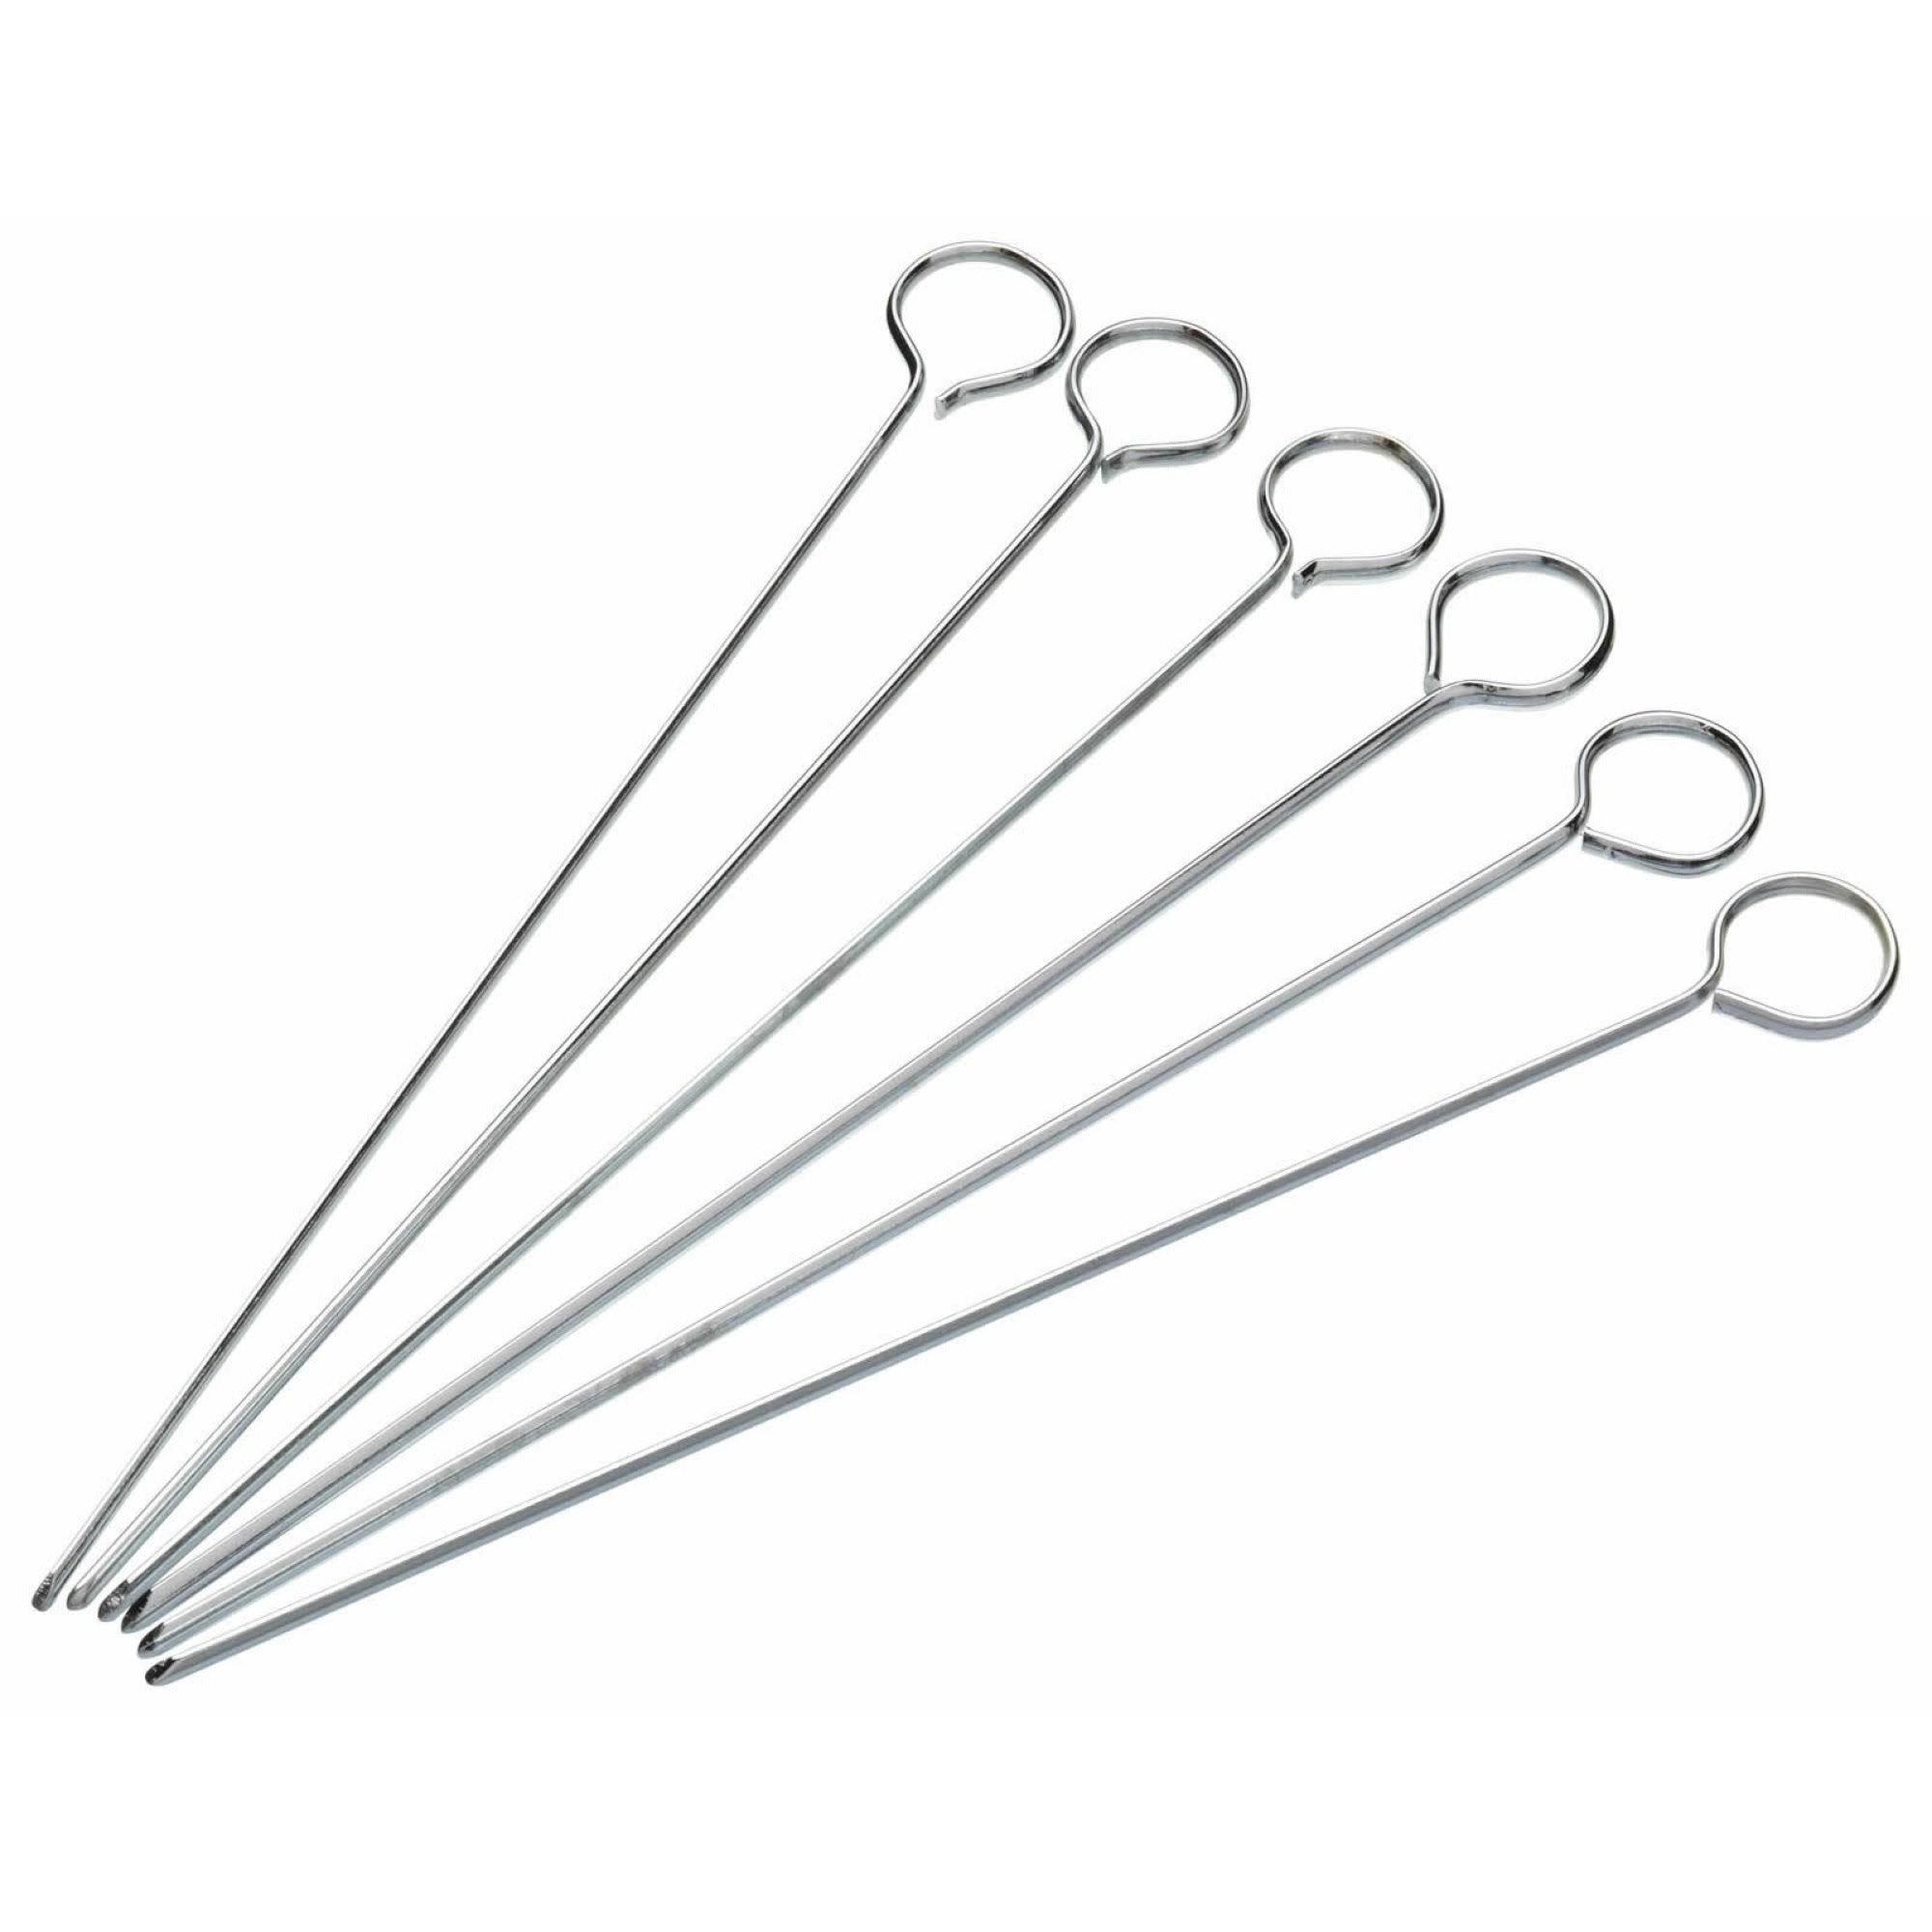 KitchenCraft - Flat Sided Skewers 15cm